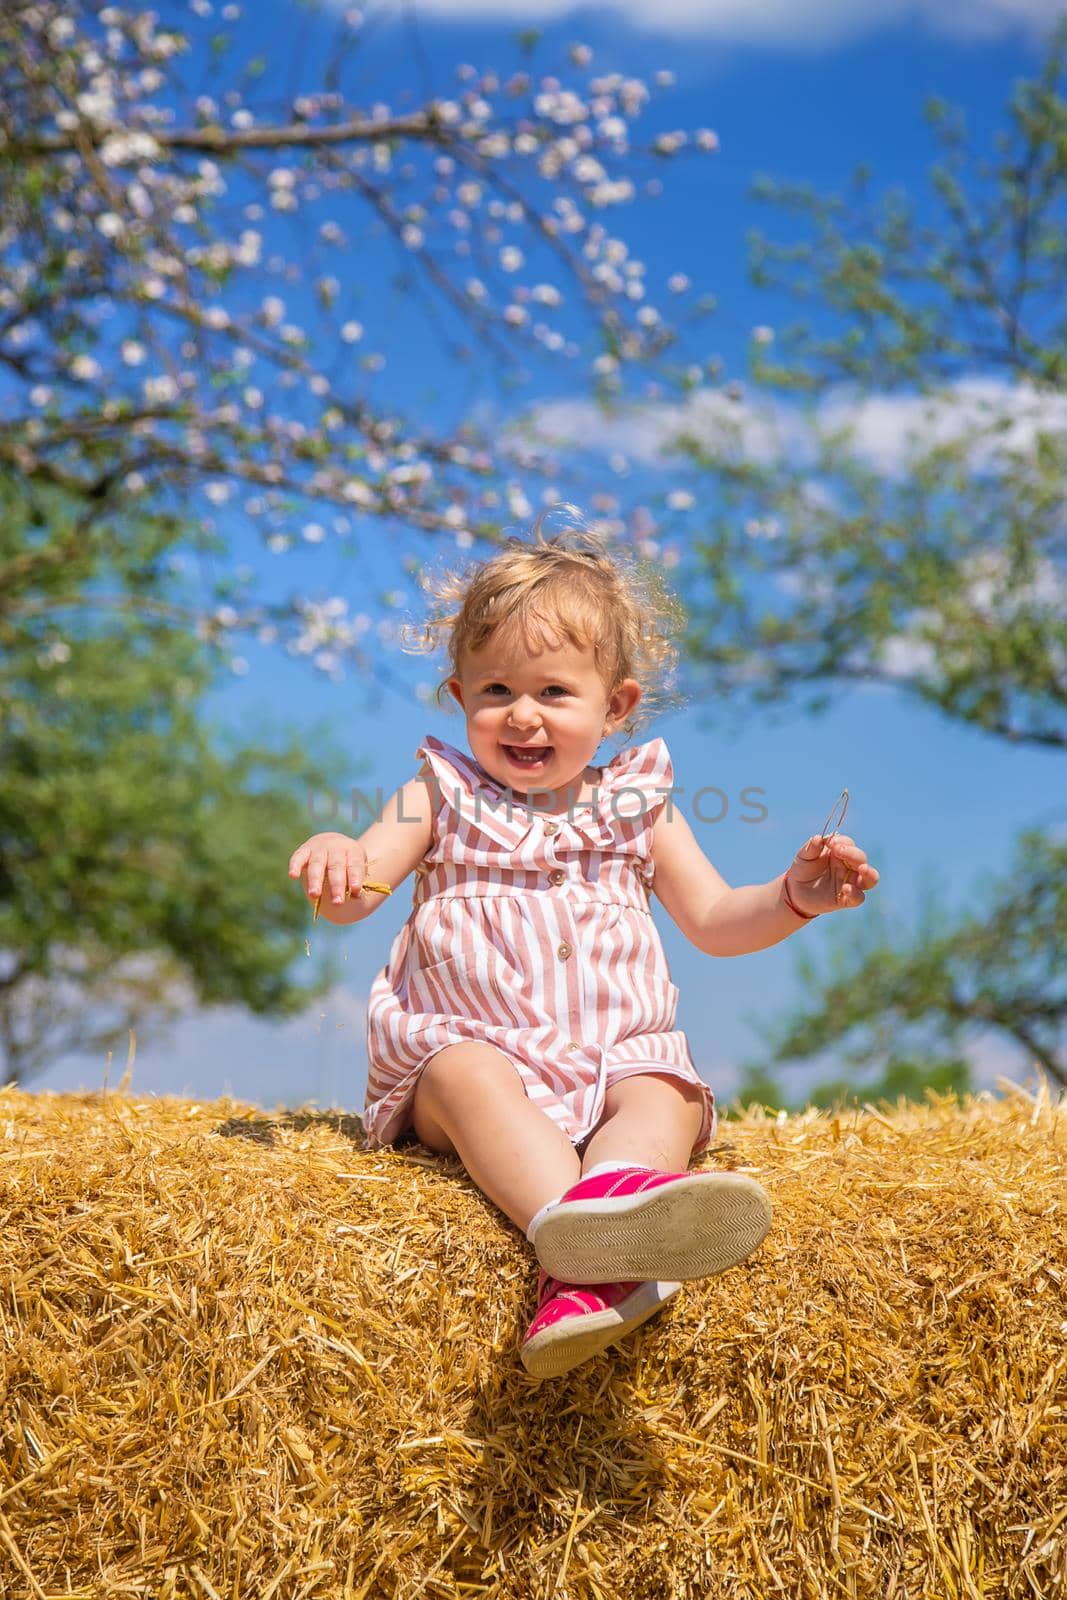 The child is sitting on a pile of hay. Selective focus. Nature.